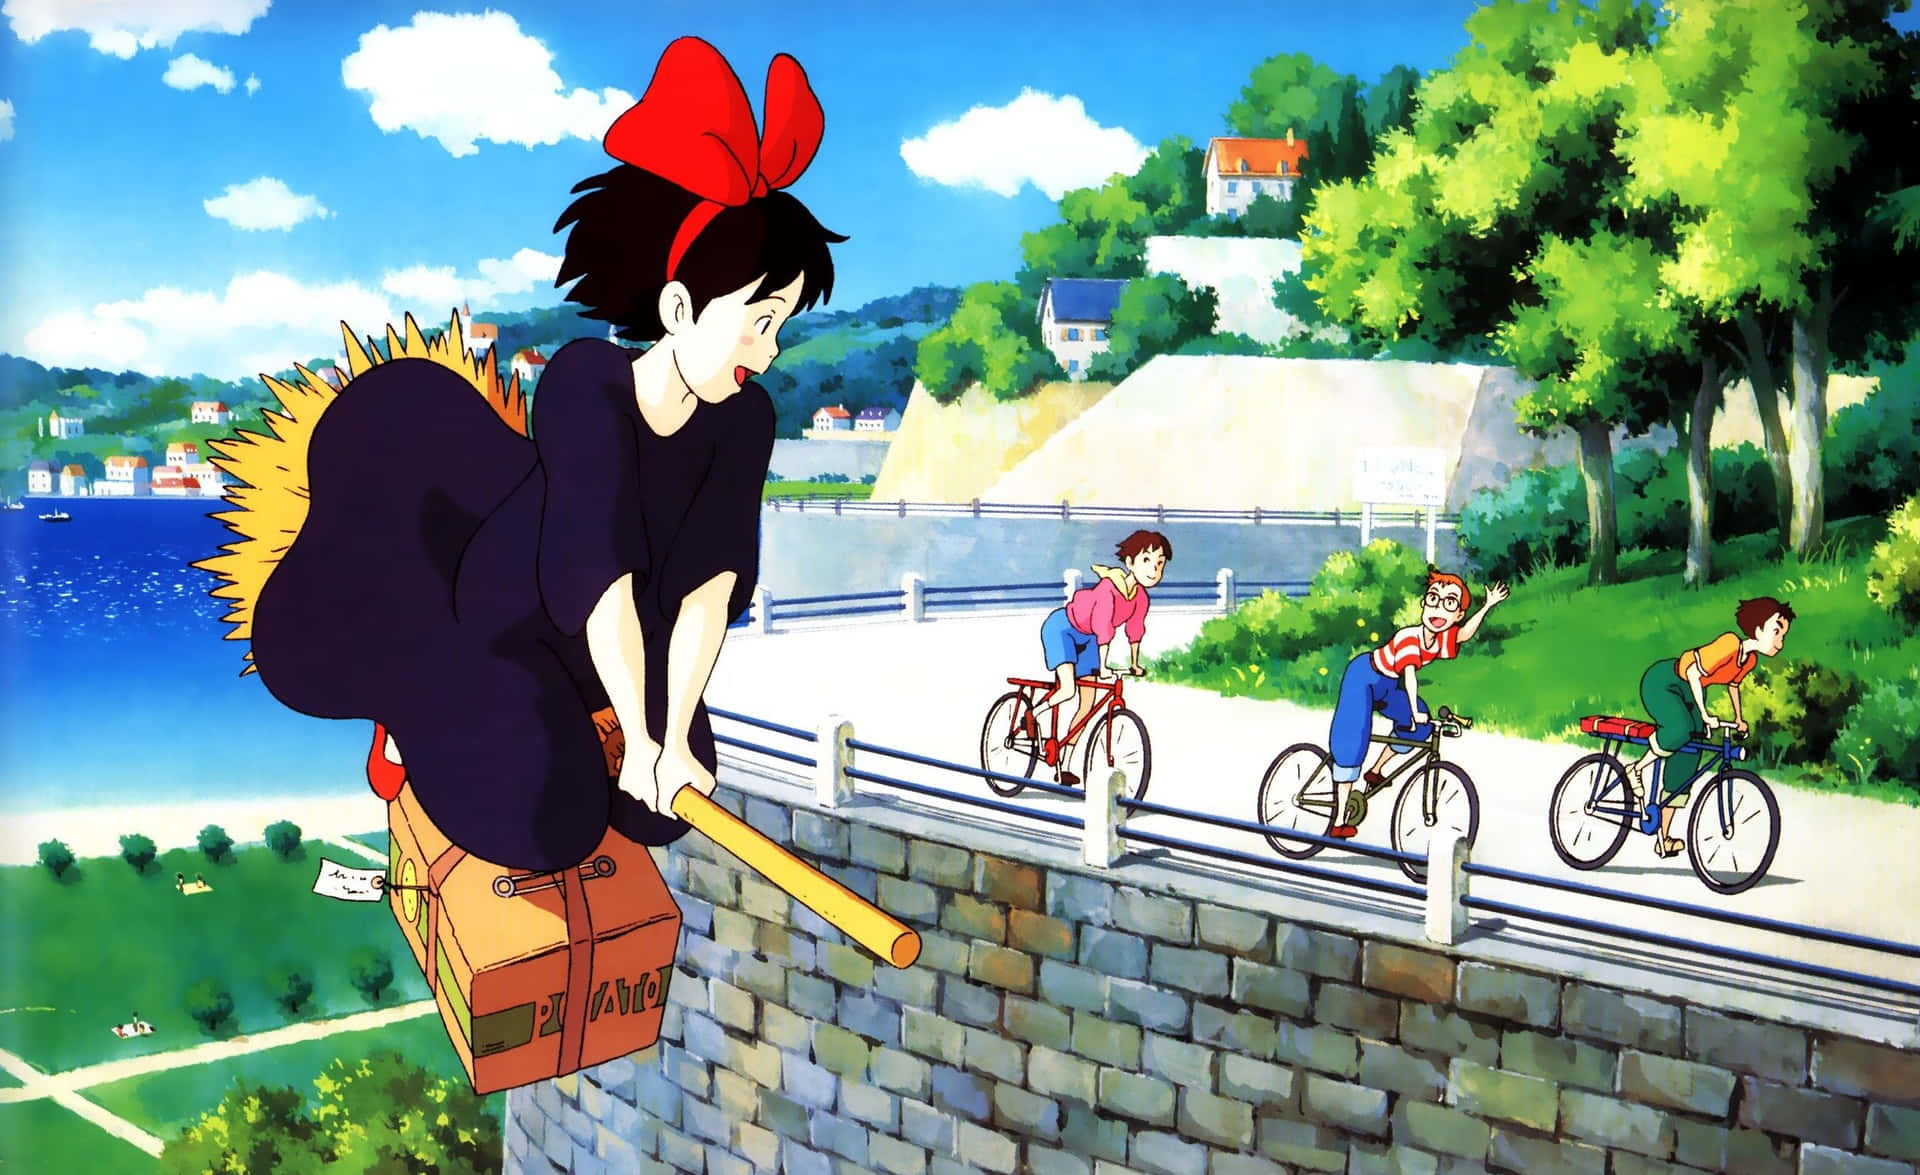 Kiki flying over the city on her broom with Jiji Wallpaper